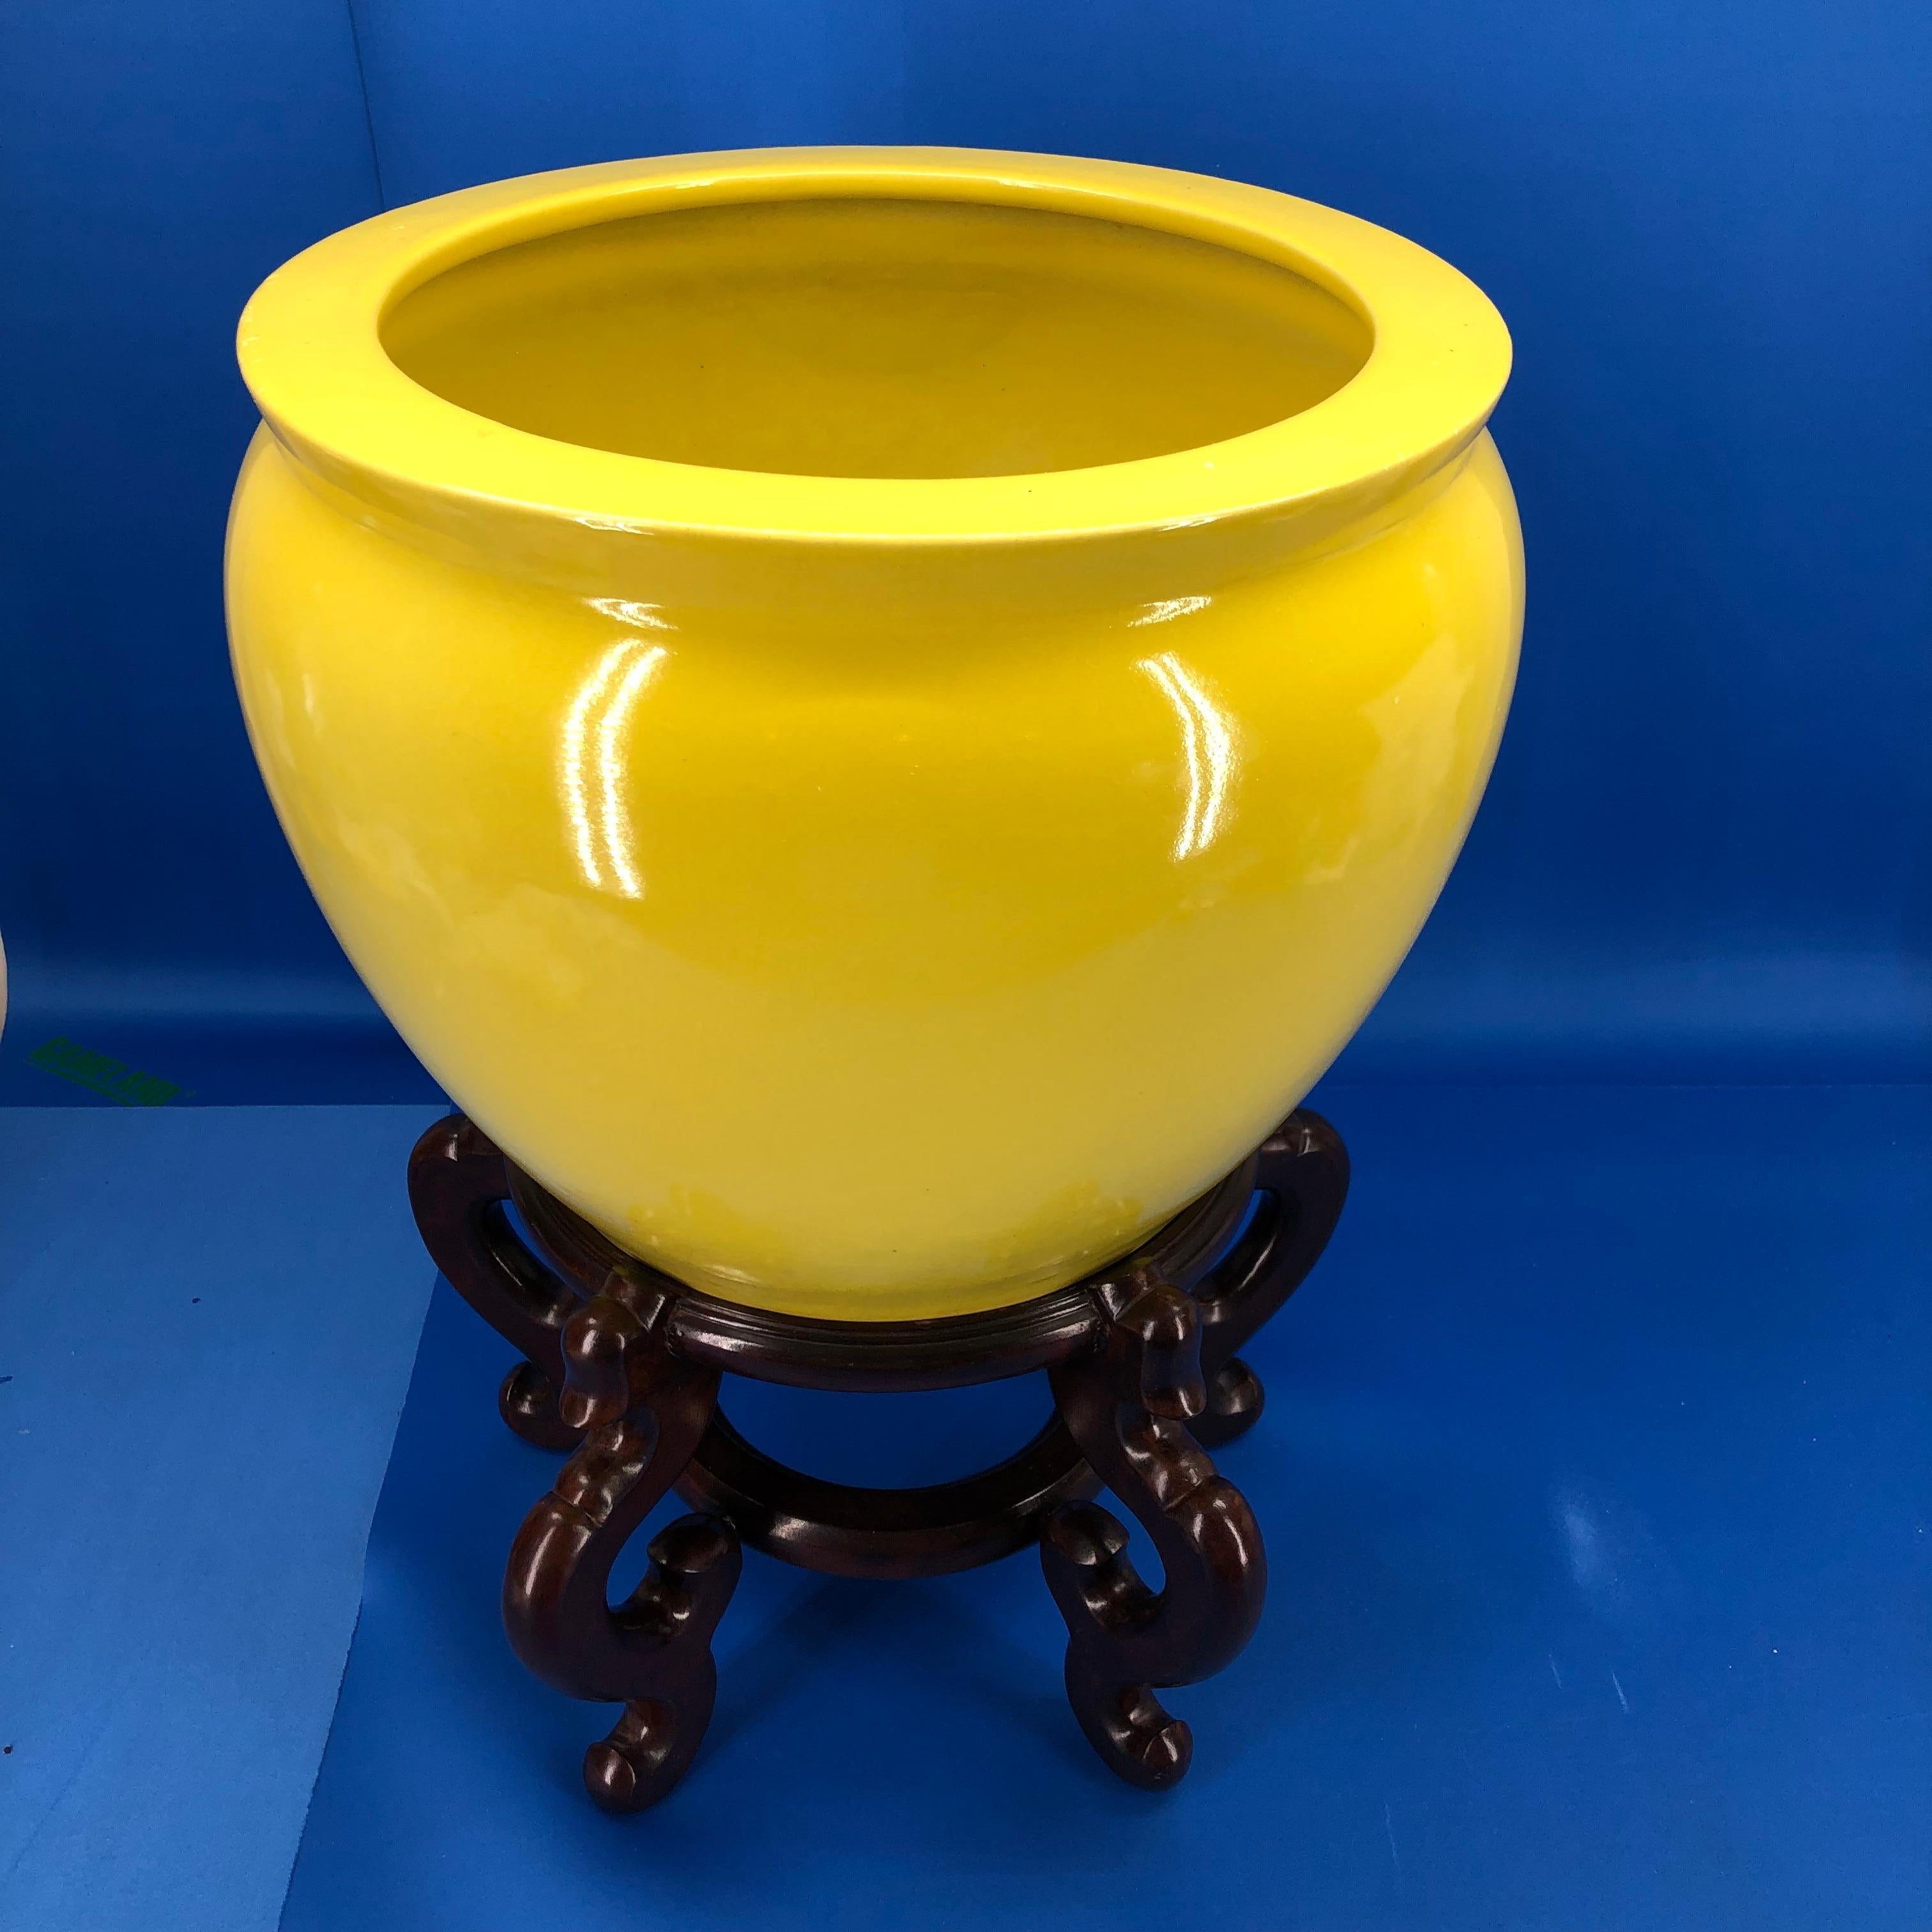 Large Bright Yellow Hand Painted Porcelain Jardinière Bowl on a Wooden Stand In Good Condition For Sale In Haddonfield, NJ